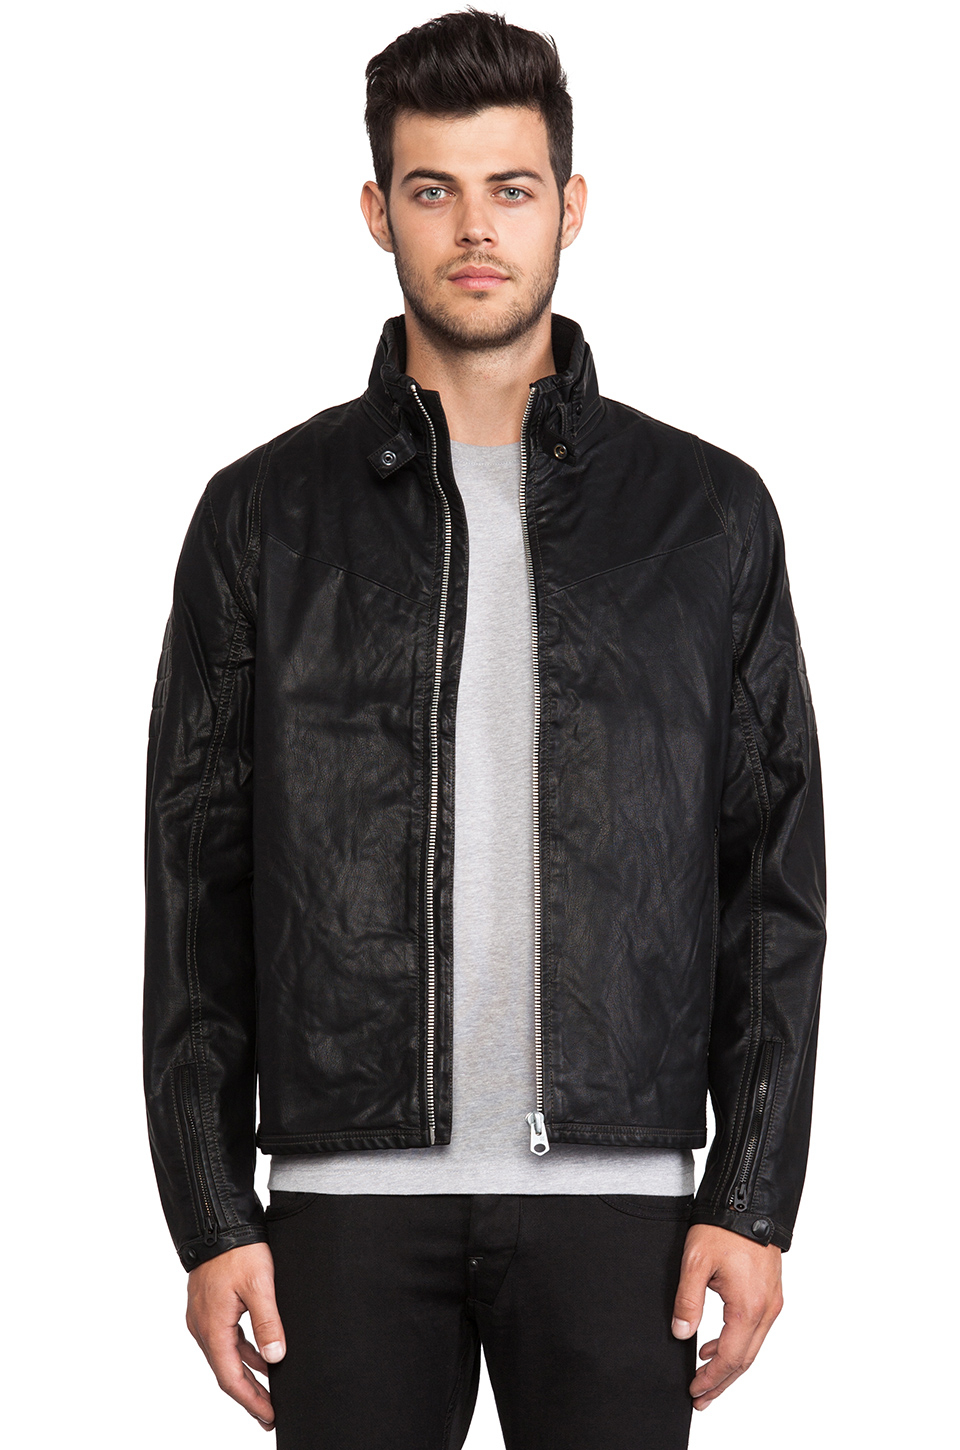 Lyst - G-Star Raw Jack Faux Leather Jacket in Black in Black for Men